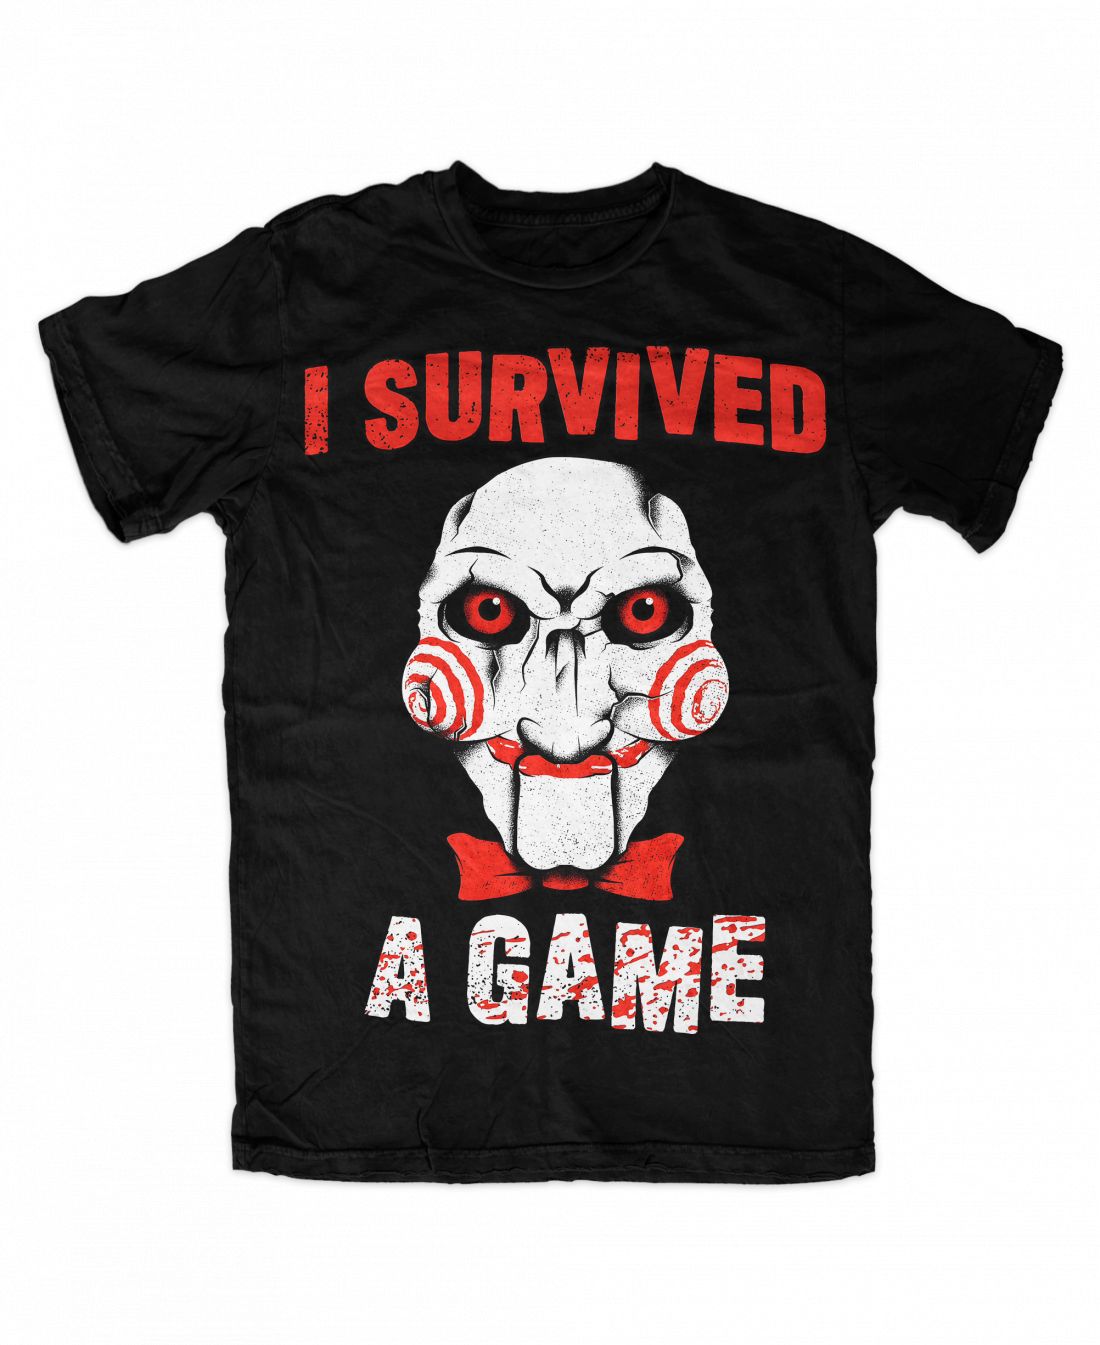 I Survived A game